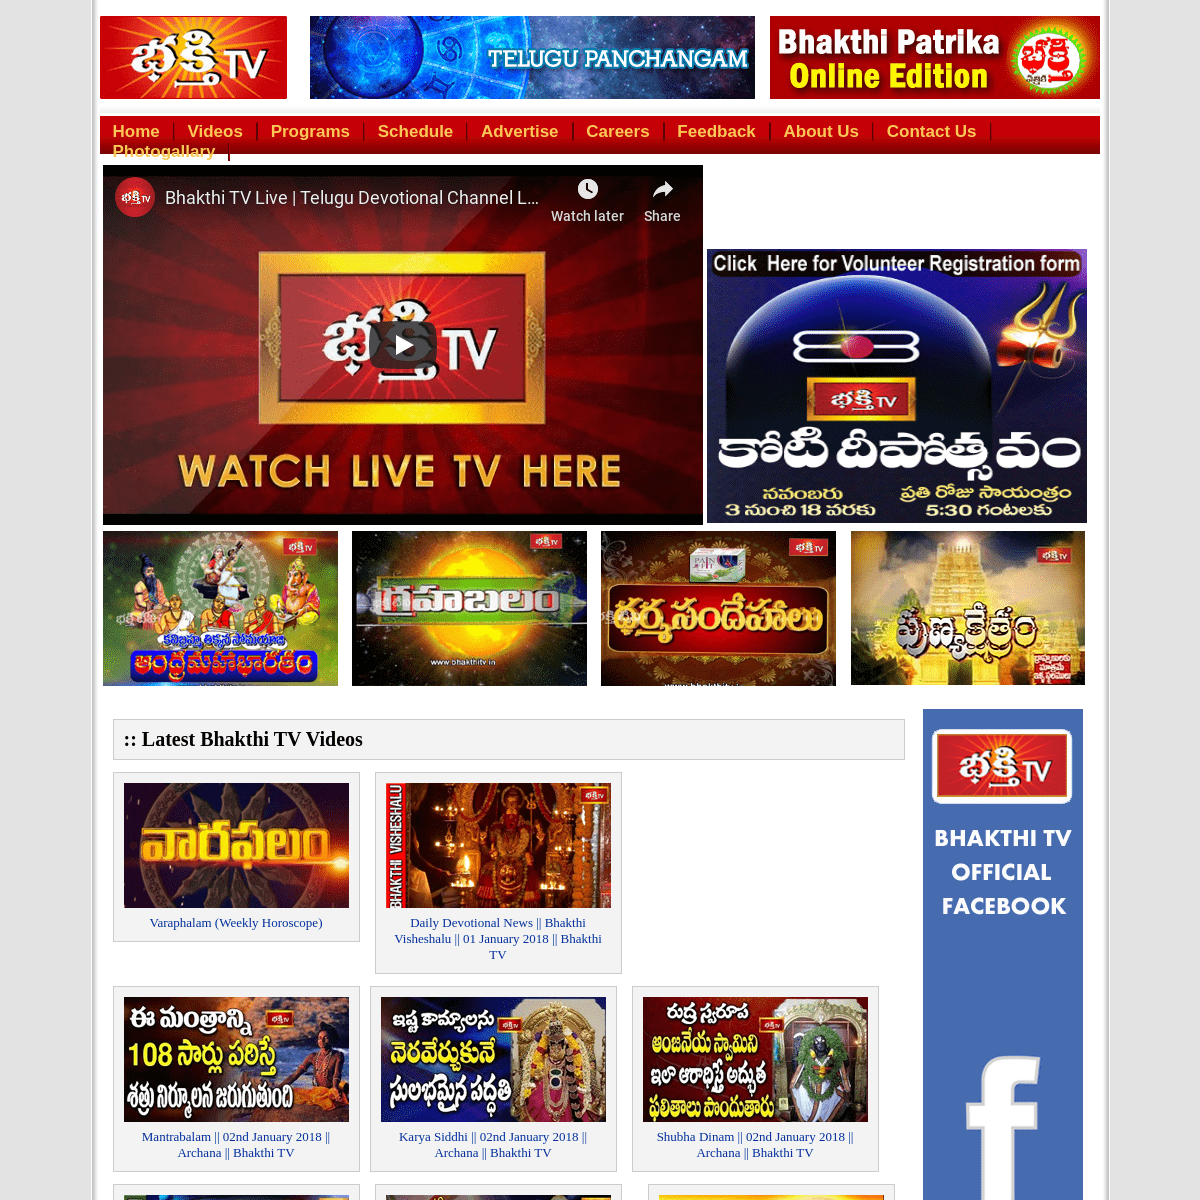 A complete backup of bhakthitv.in